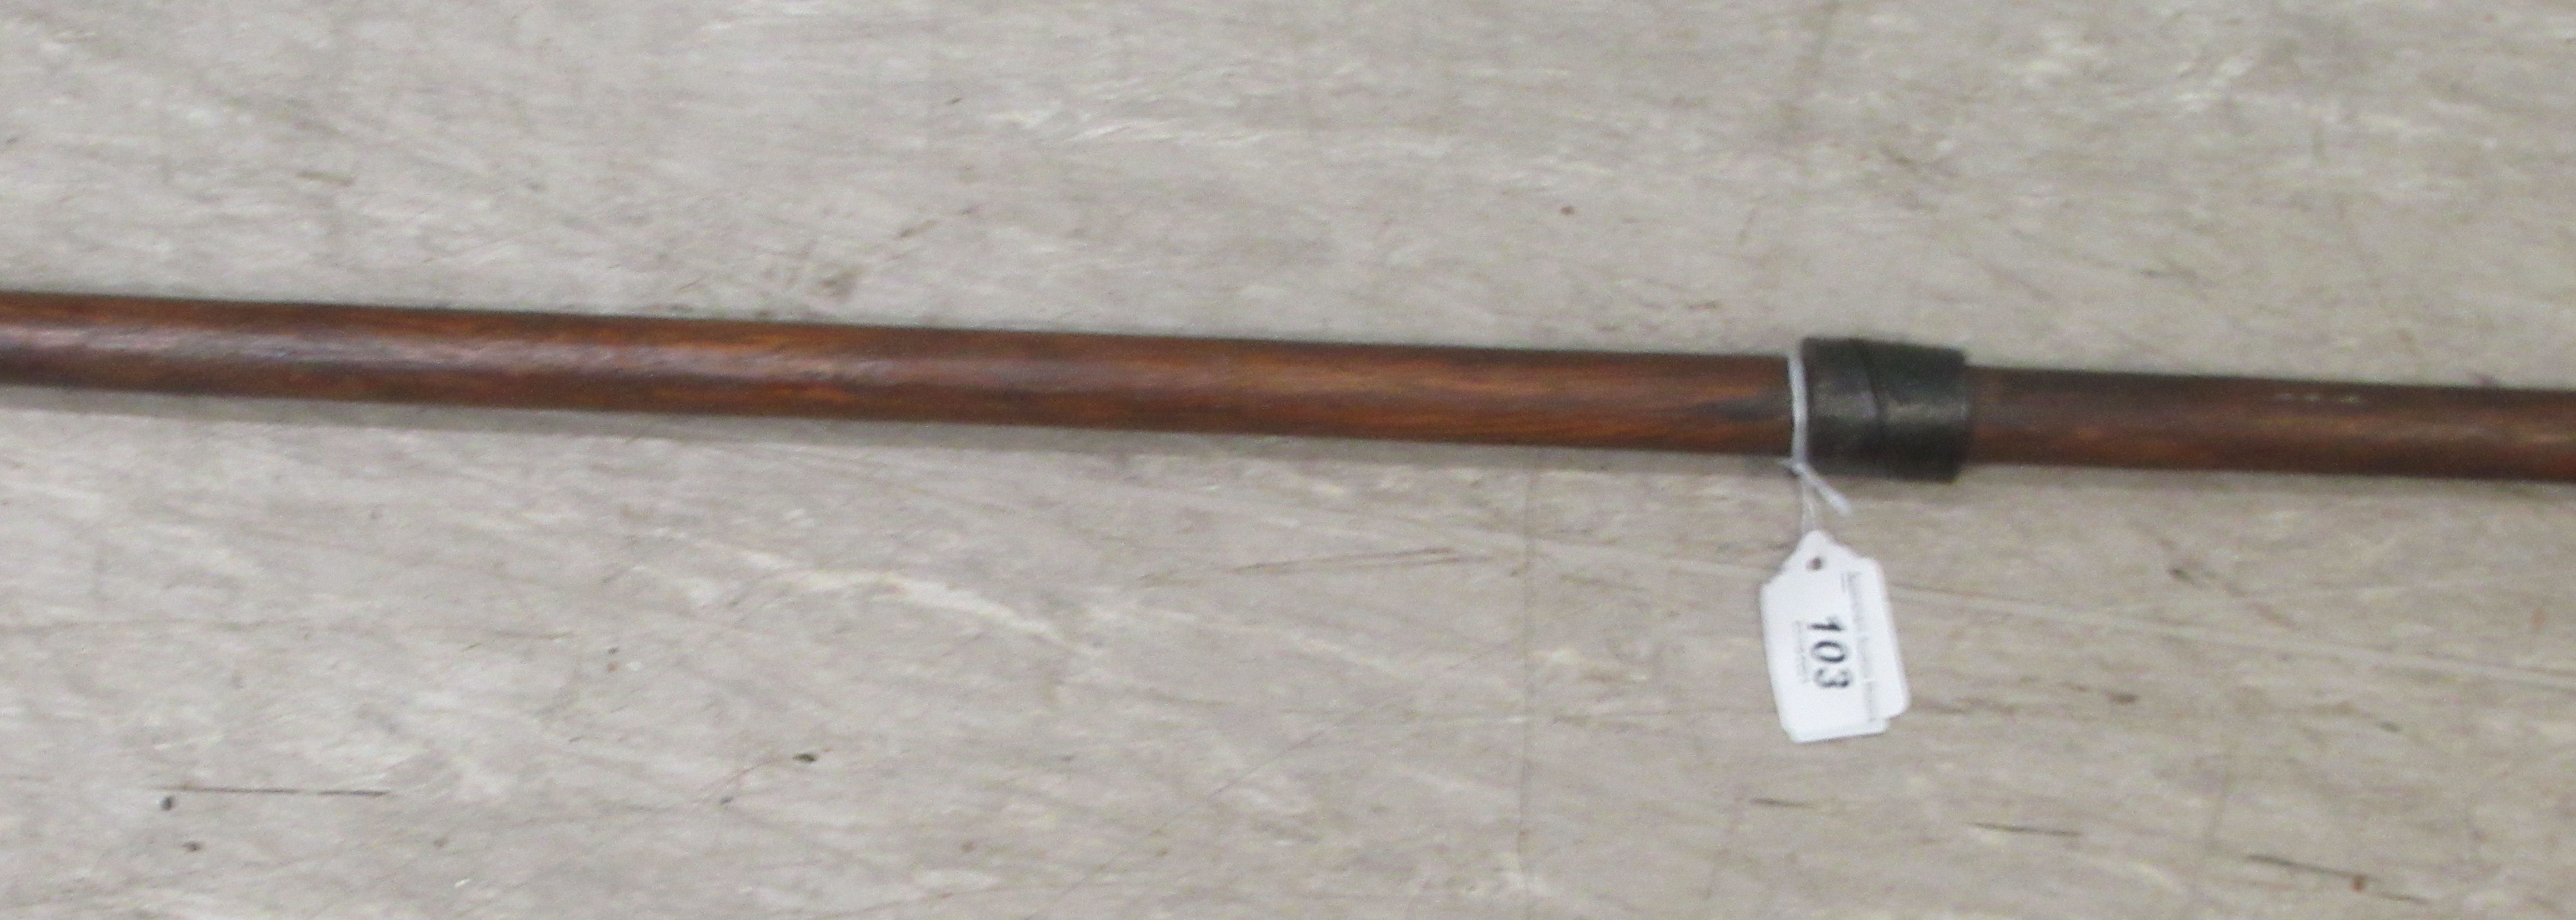 A 20thC African Zulu Iklwa spear with a broad leaf blade and a hardwood shaft, wrapped with spiral - Image 6 of 7